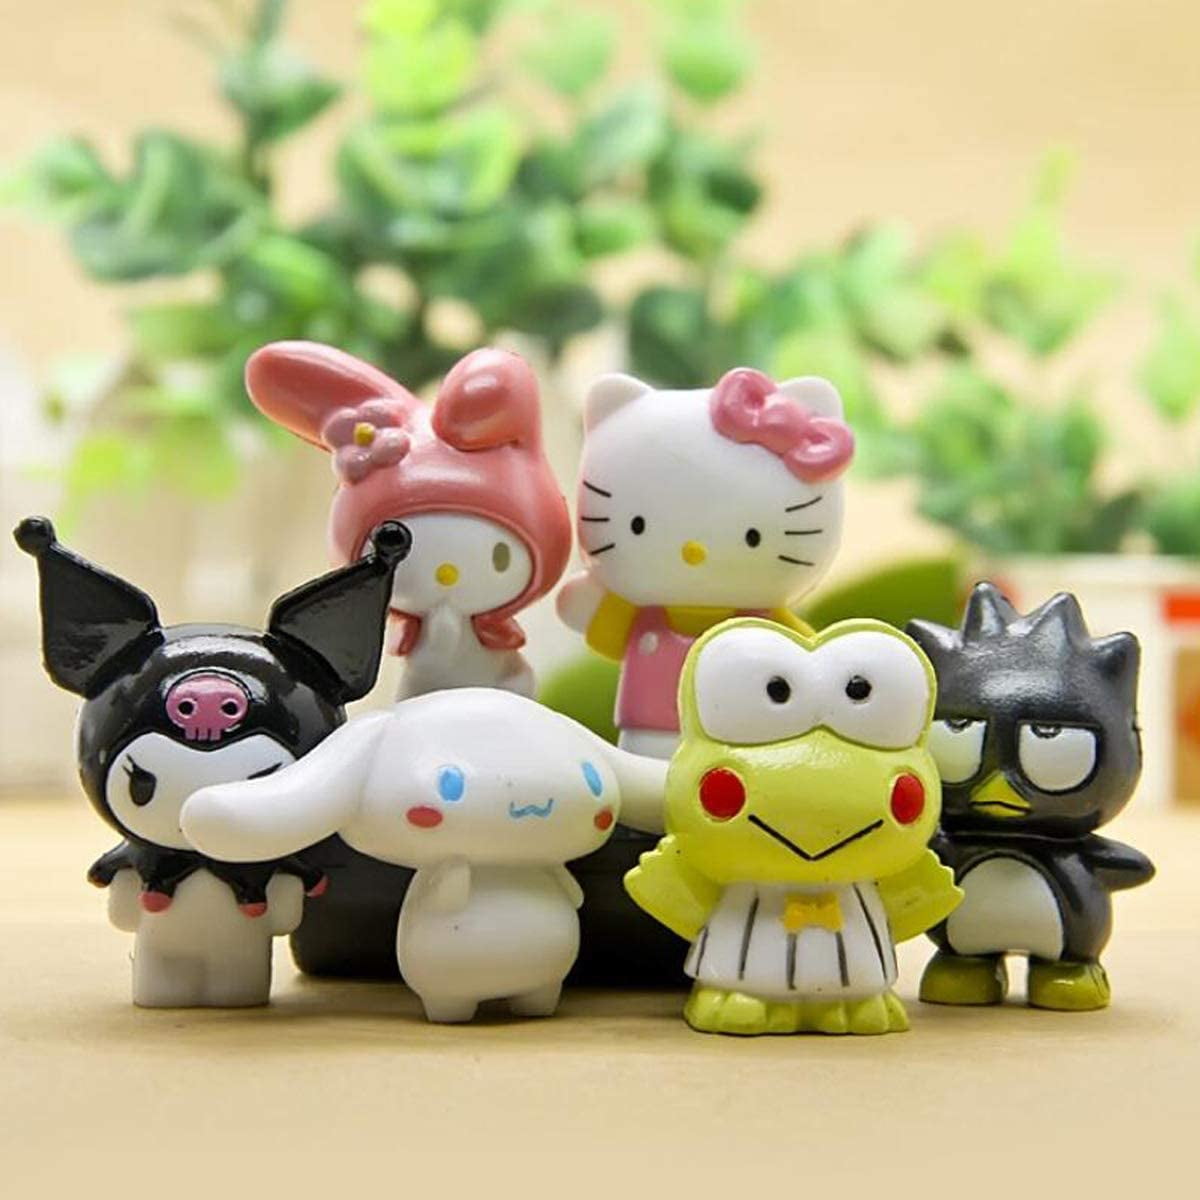 6 pcs Cute Lovely Animal Figure Animal Figurines Characters Toys Mini Figure Collection Playset Plant Garden Cake Decoration Cake Topper Automobile Decoration 